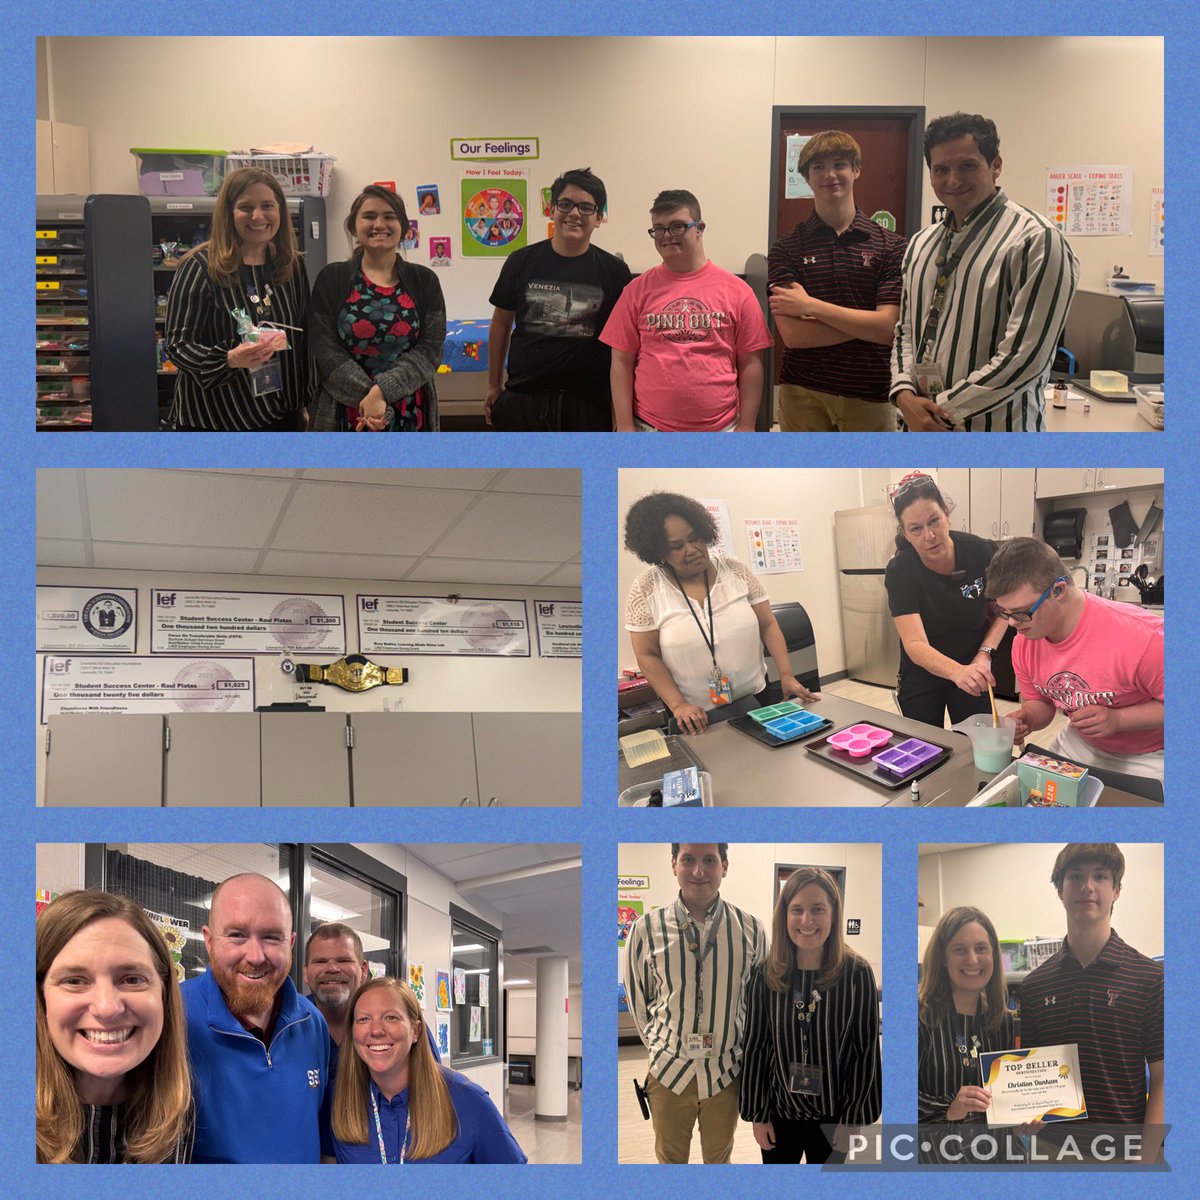 Enjoyed visiting @LewisvilleISD Student Success Center and see @LEFforLISD Grants in Action with students learning job and life skills. Enjoyed being part of student awards! #OneLISD #BetheOne for kids #RappontheRoad